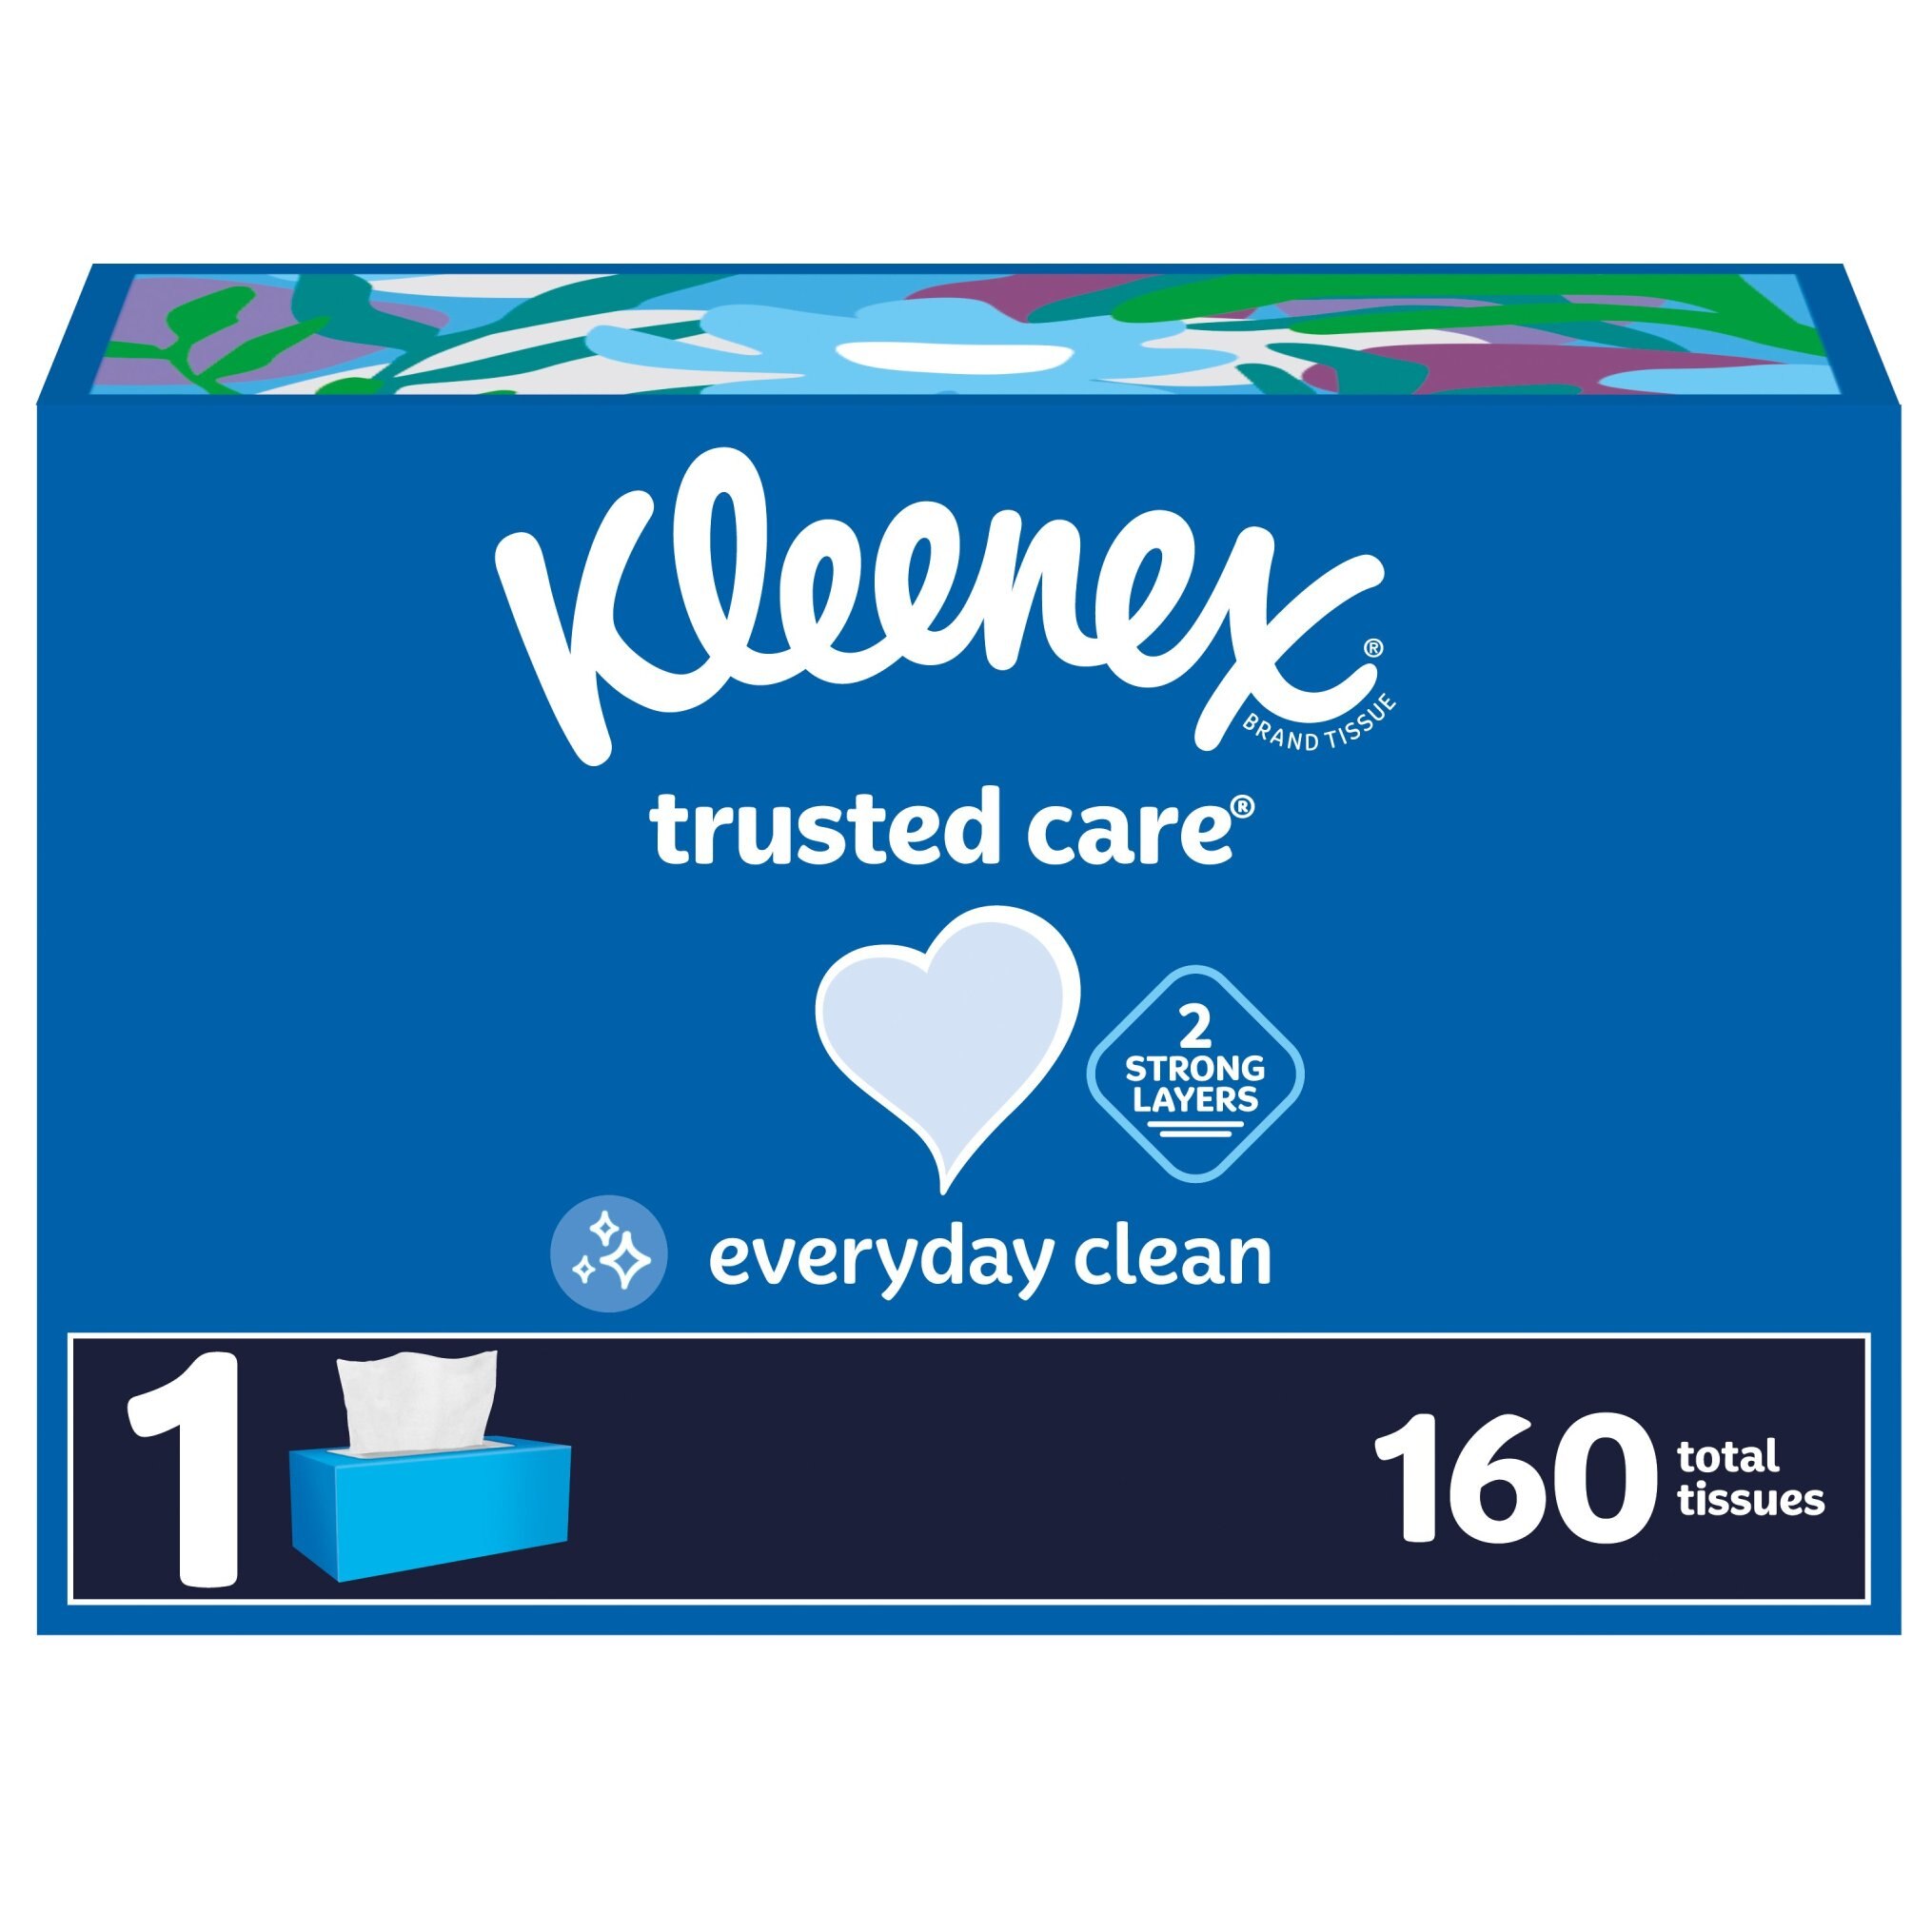 Kleenex Trusted Care Facial Tissues, 2-Ply, 160 Tissues per Box